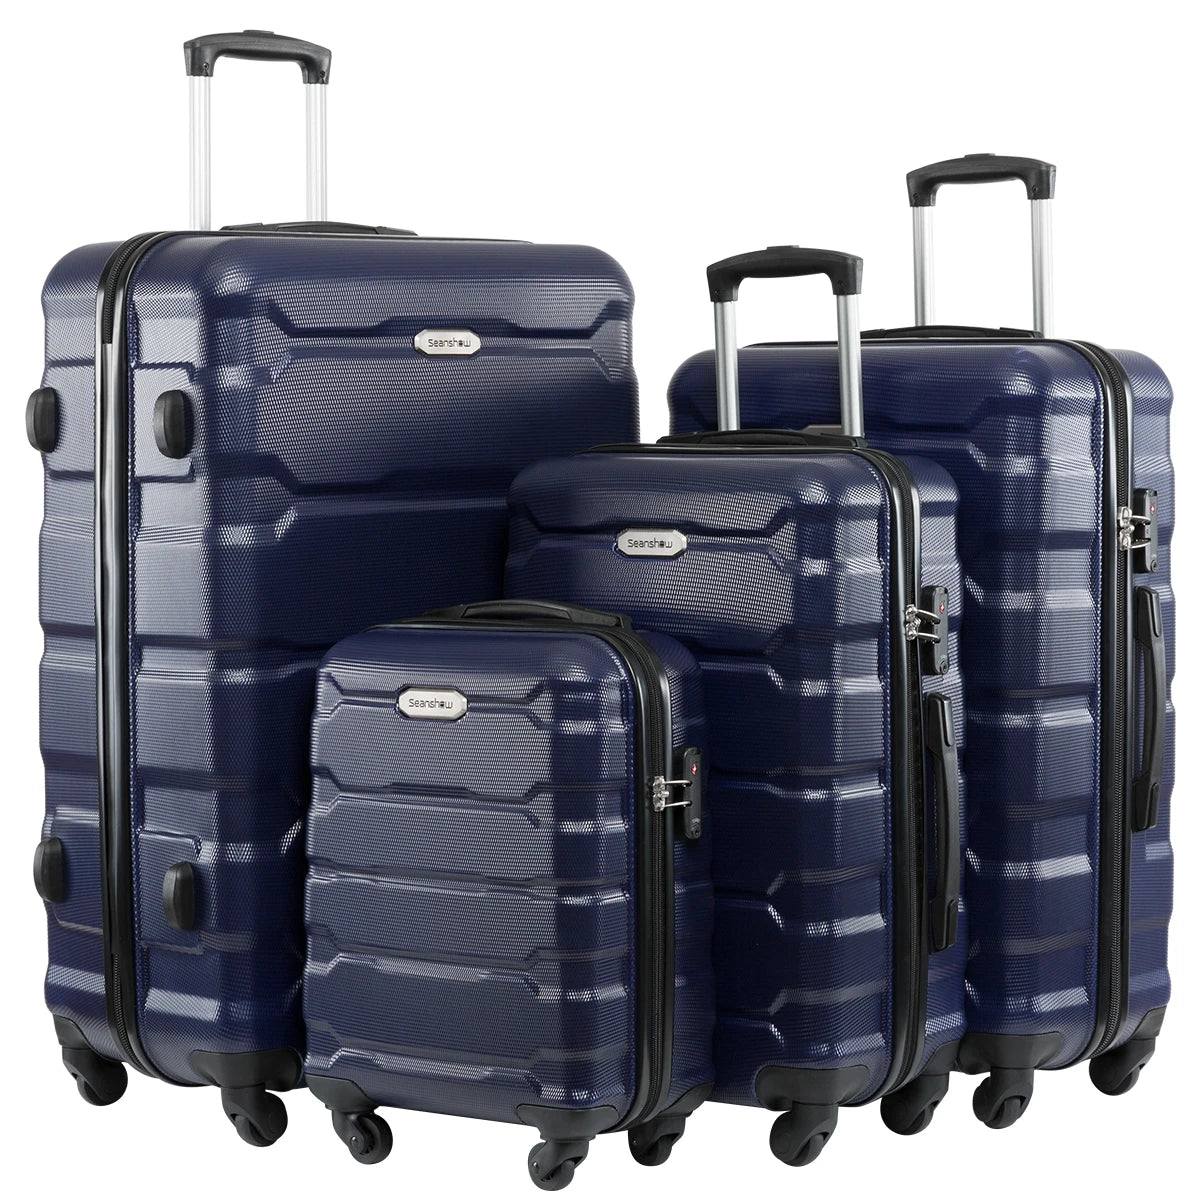 Luggage Sets 4 pieces 18/22/26/30 inch Suitcase Large Capacity Travel Bag Suitcases on Wheels Bag Password Trolley Luggage